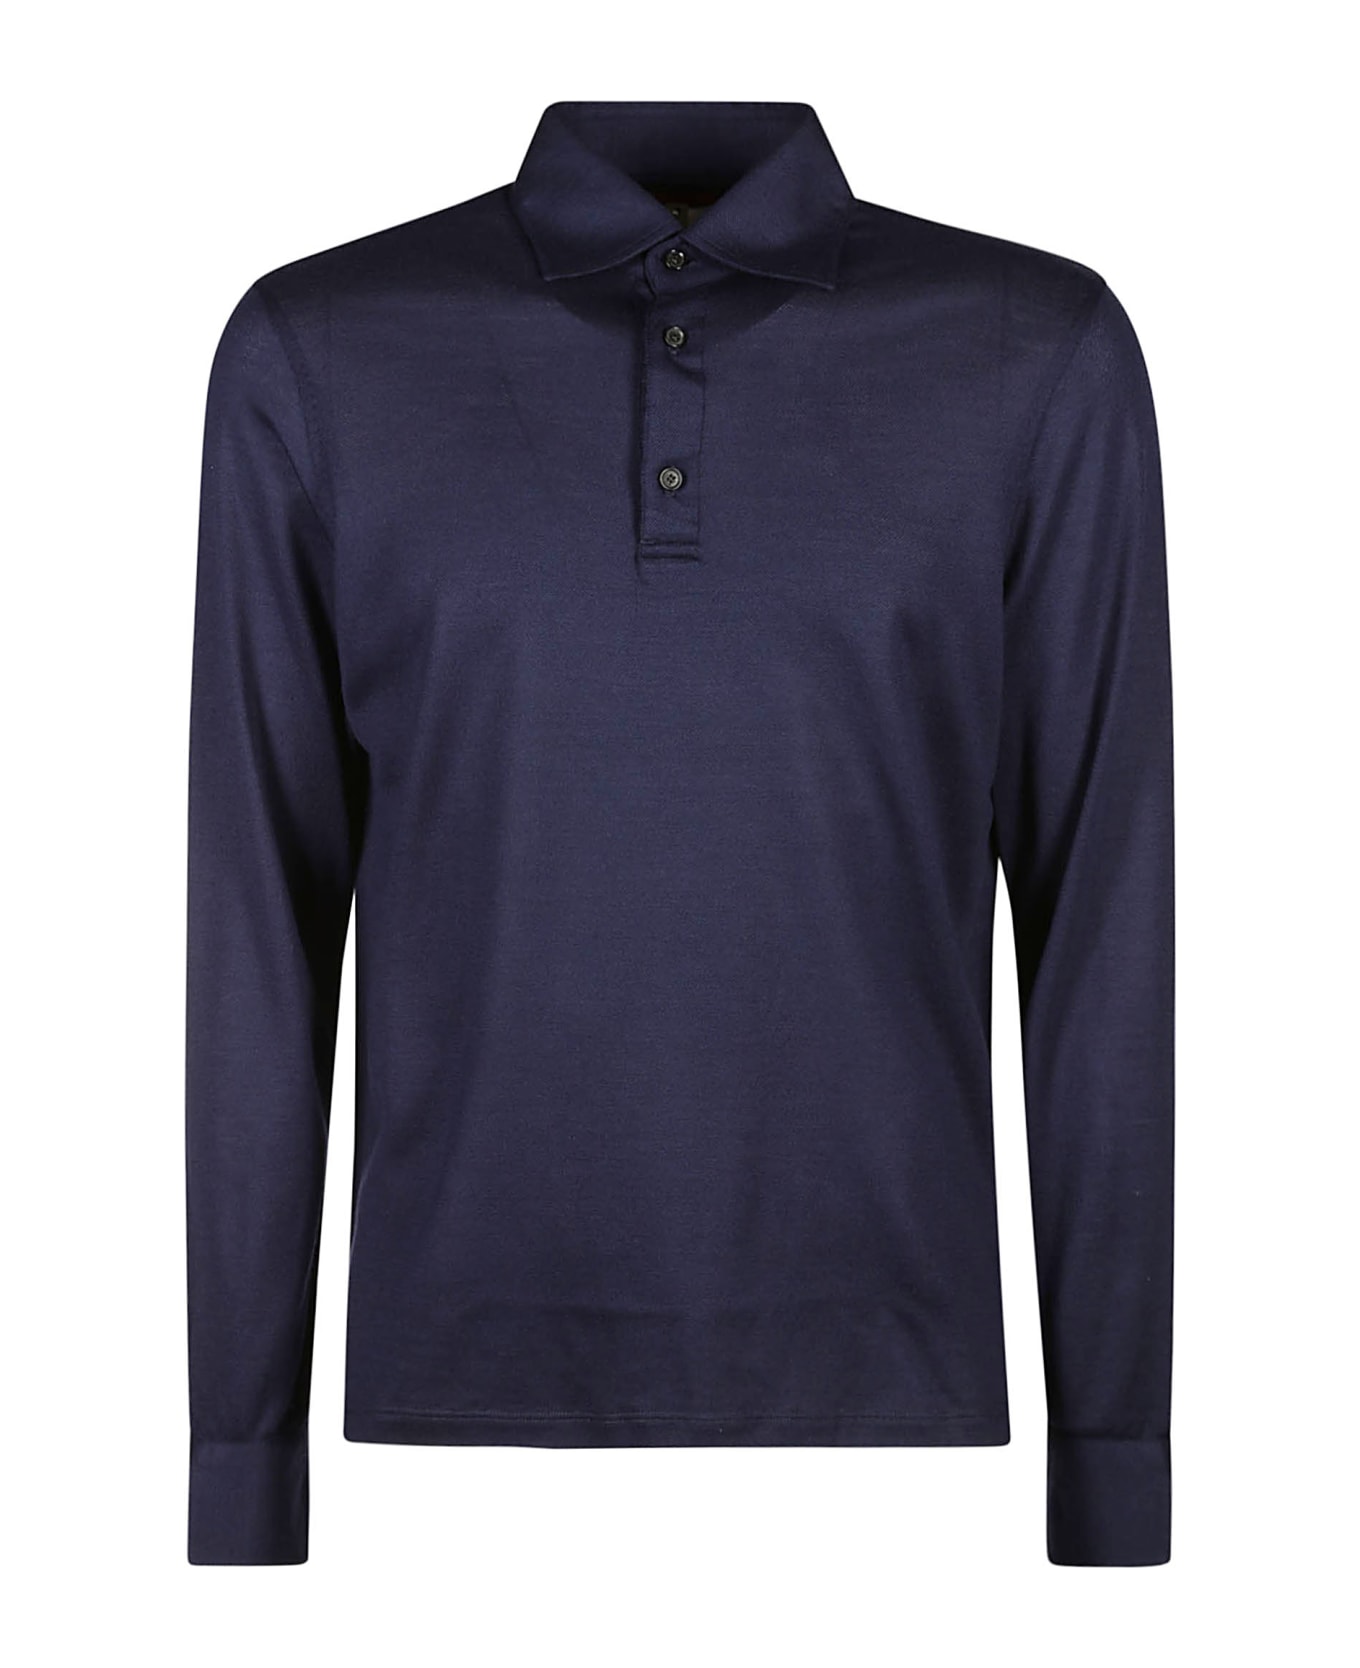 Isaia Jersey - Blue